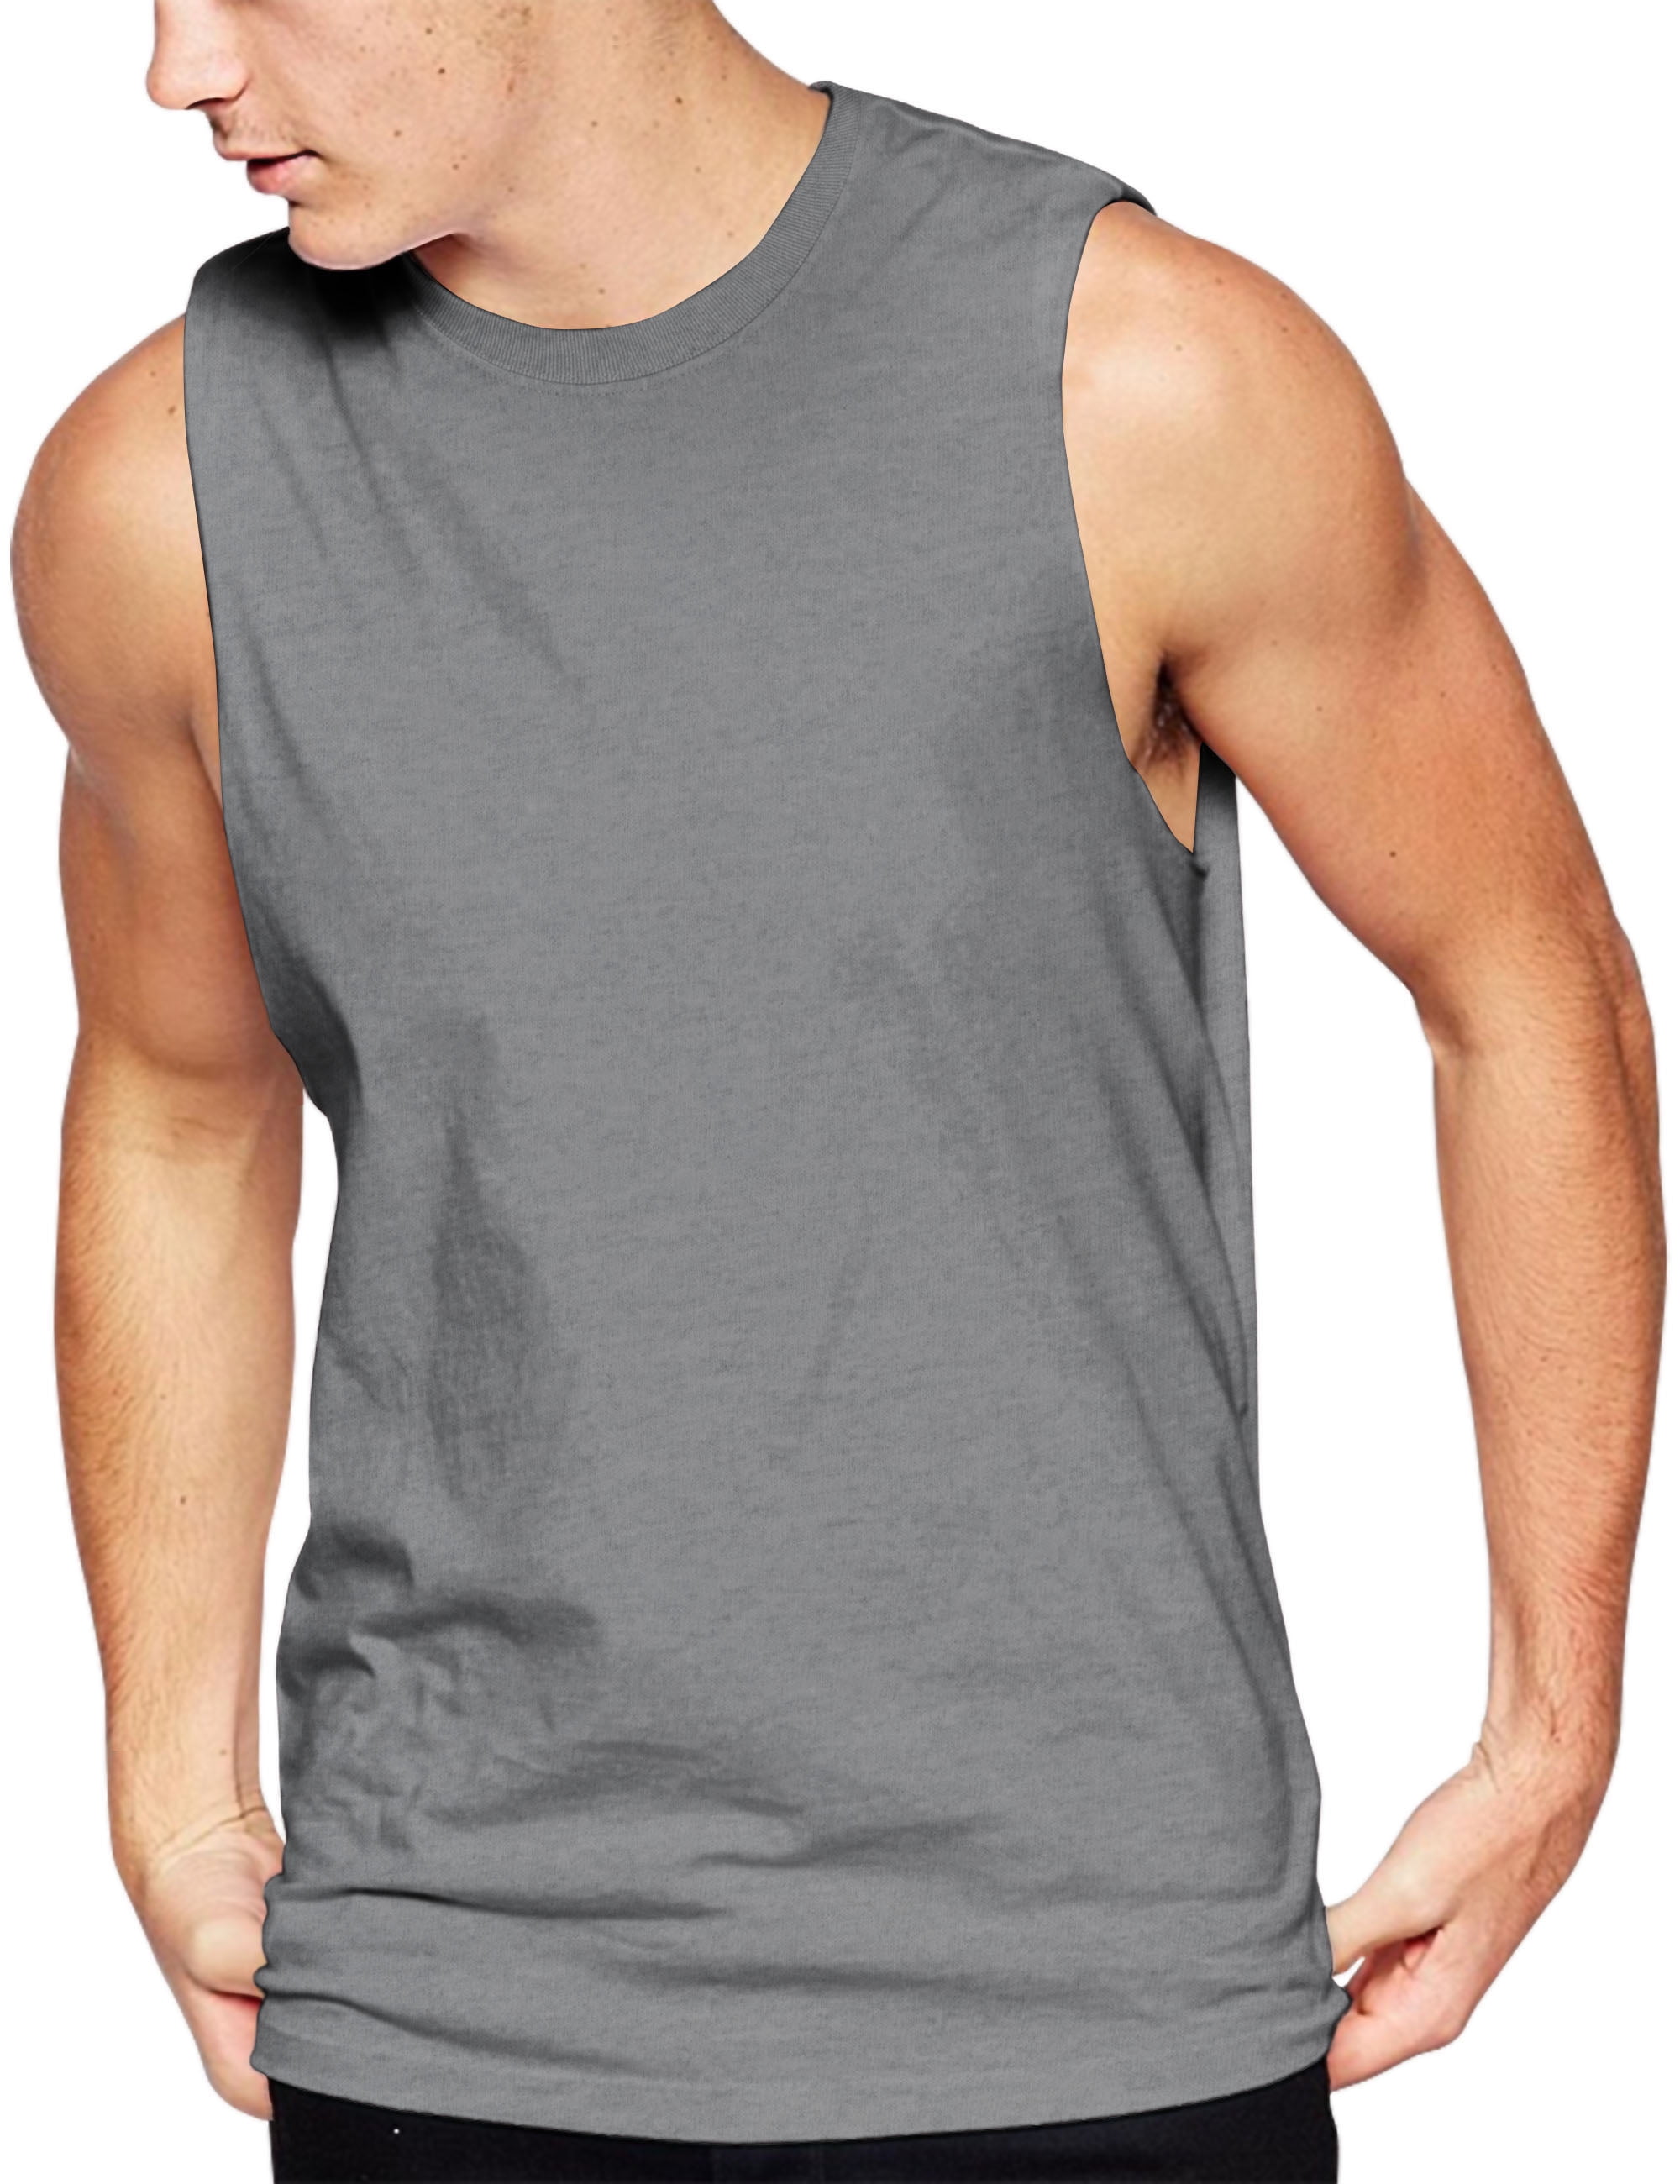 Hat and Beyond Mens Tank Top Muscle Fit Active Exercise Sleeveless Shirt 